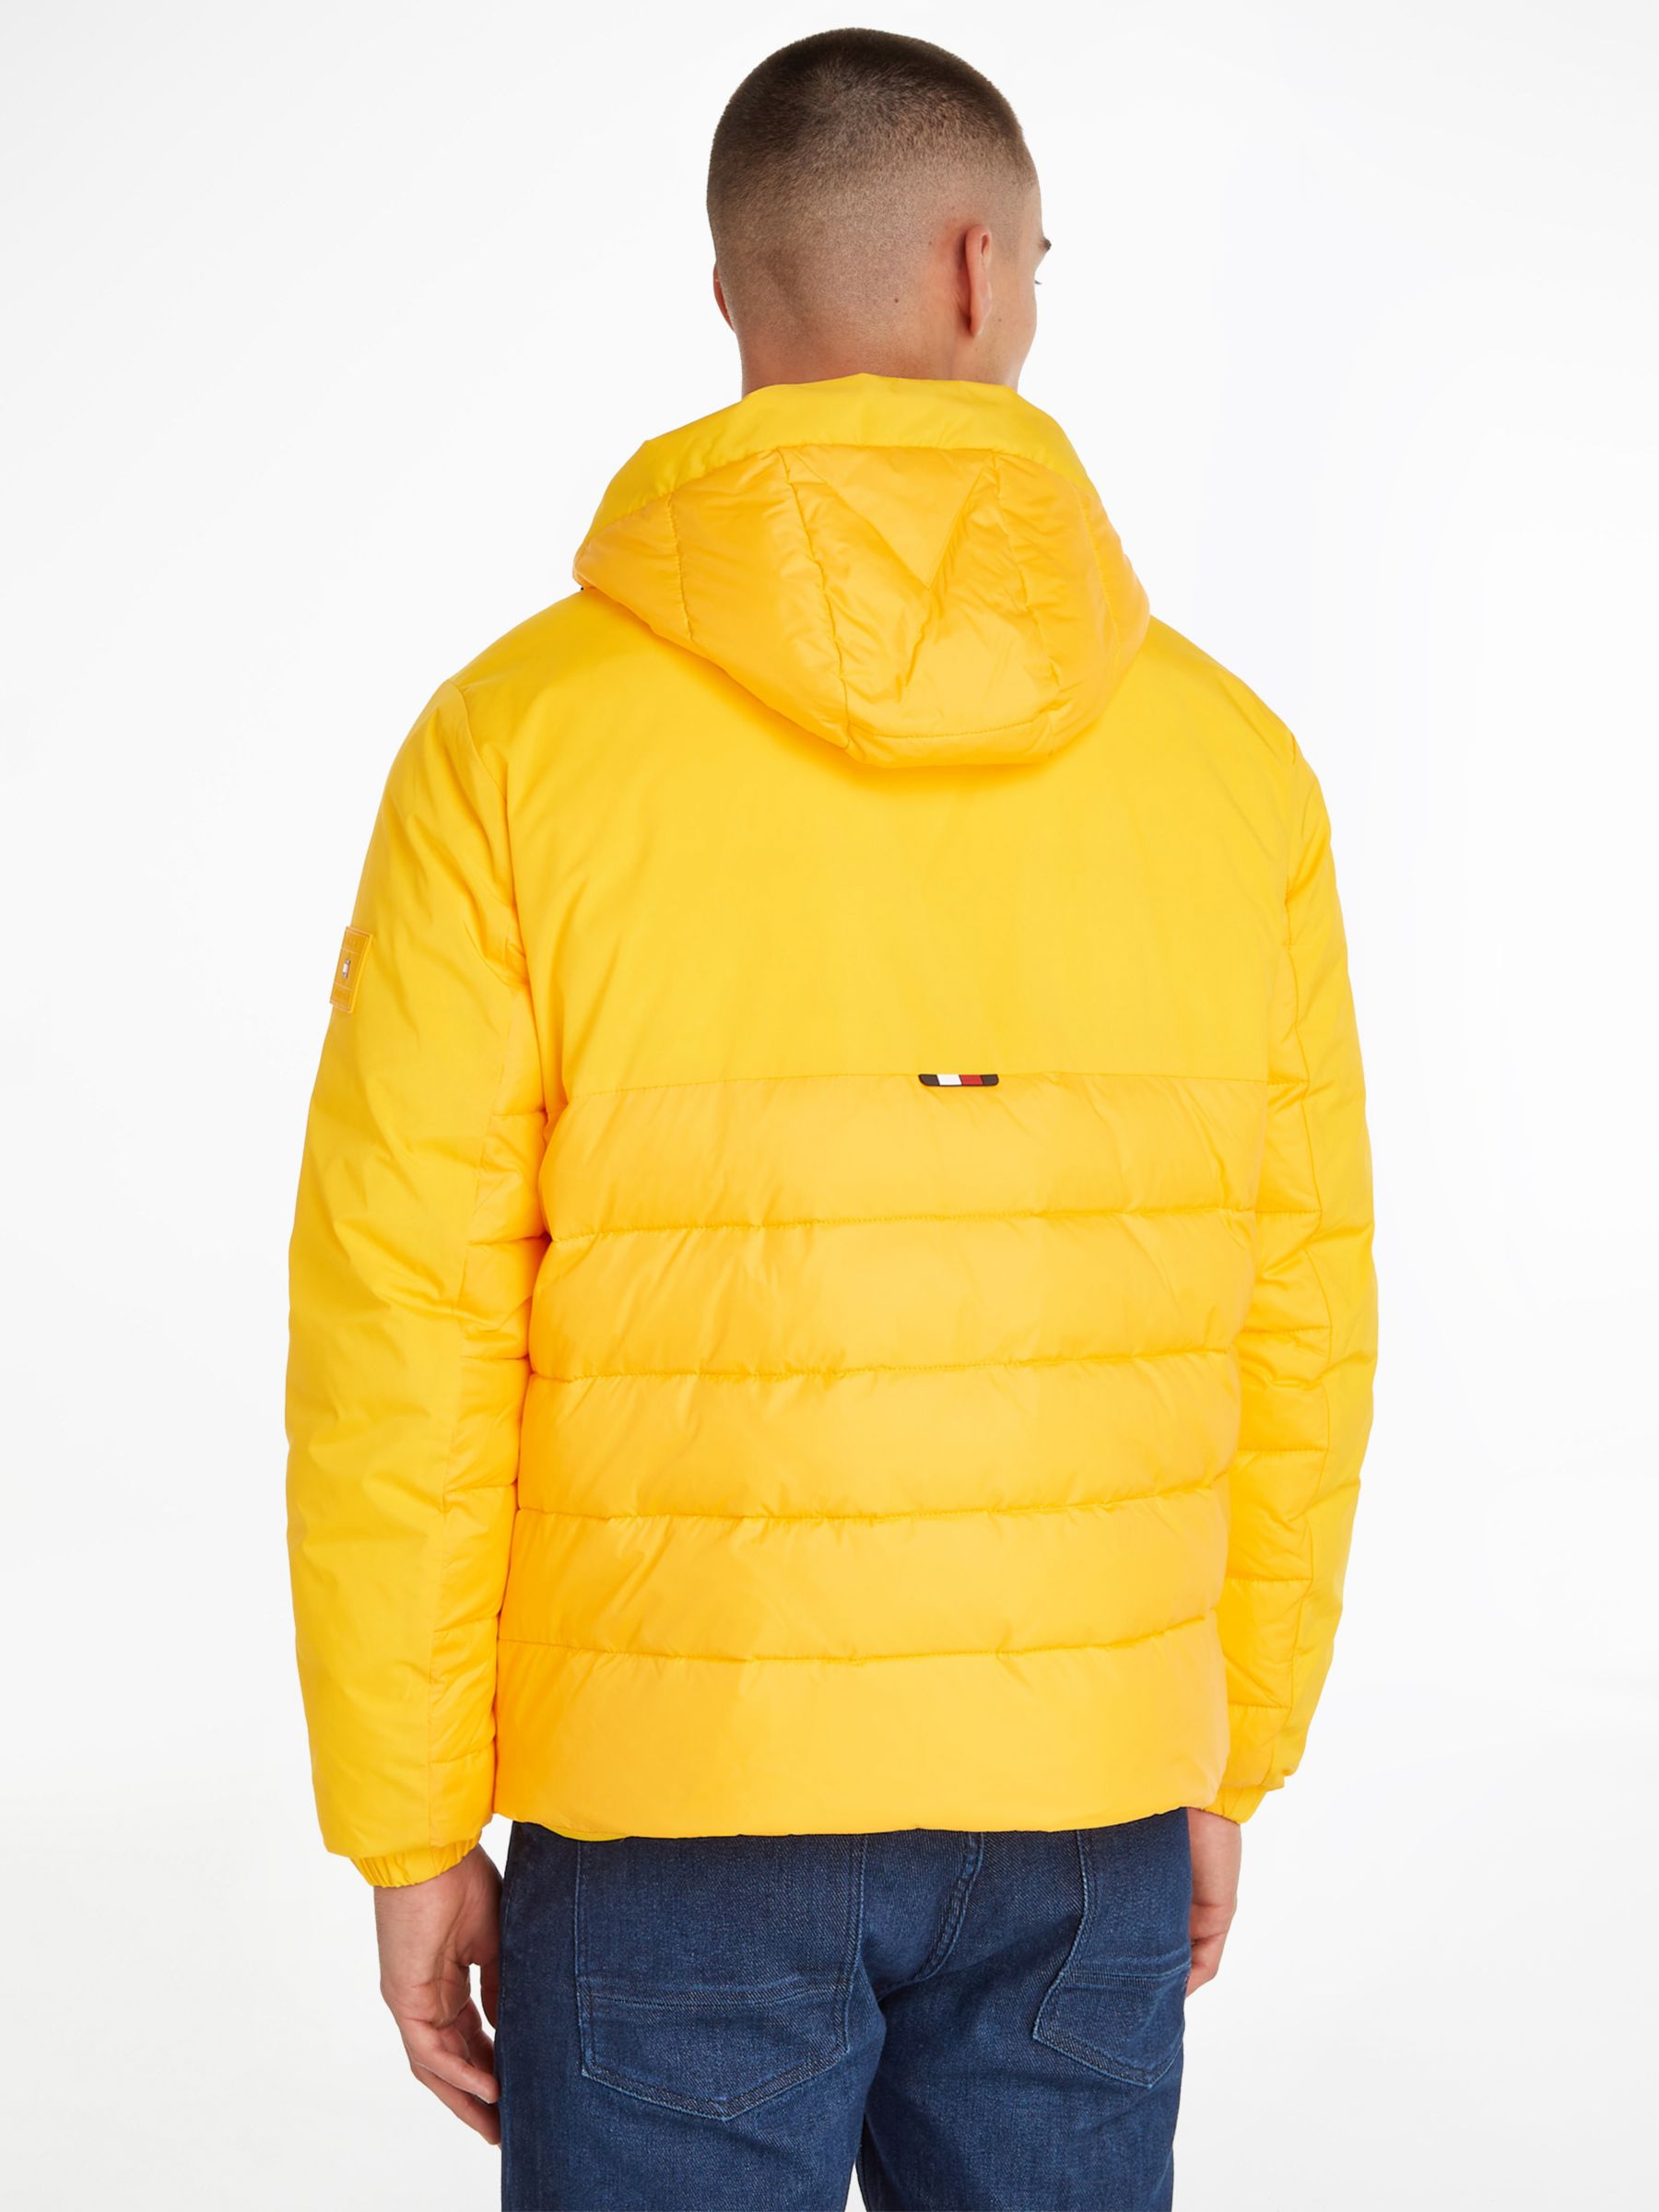 Tommy Hilfiger Mixed Media Hooded Jacket, Solstice at John Lewis & Partners